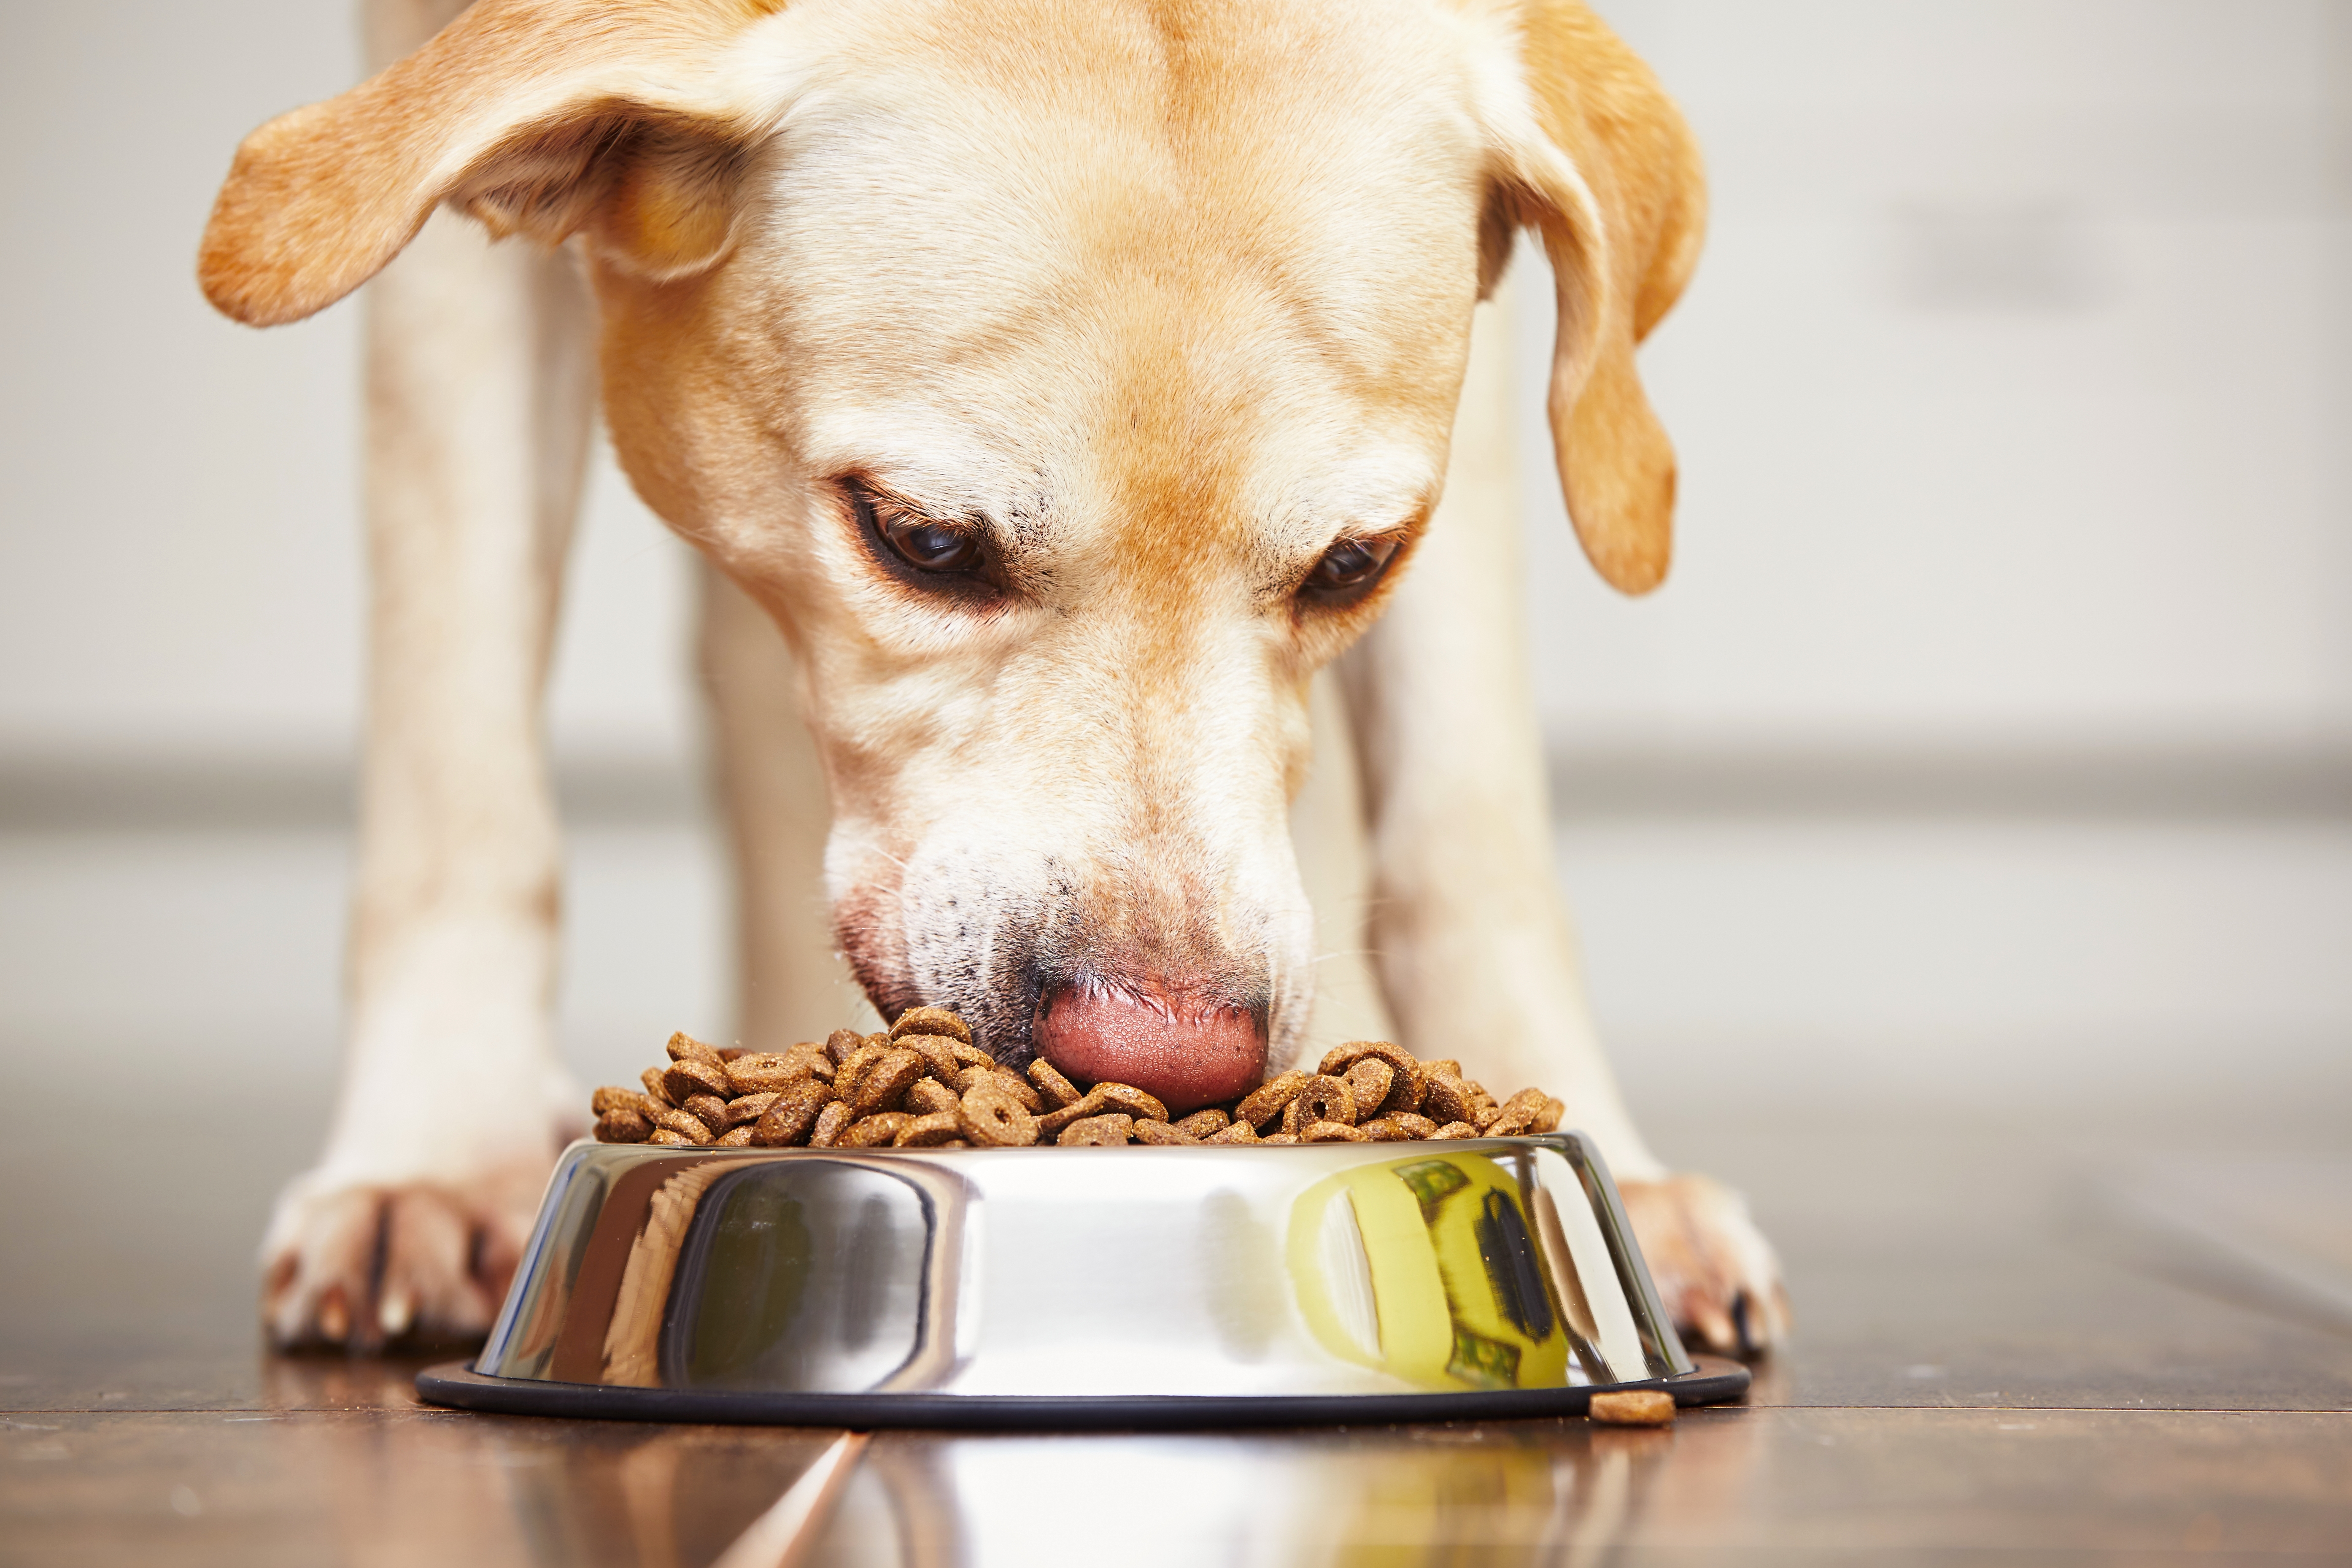 Can You Buy Dog Food With Snap Benefits? 2